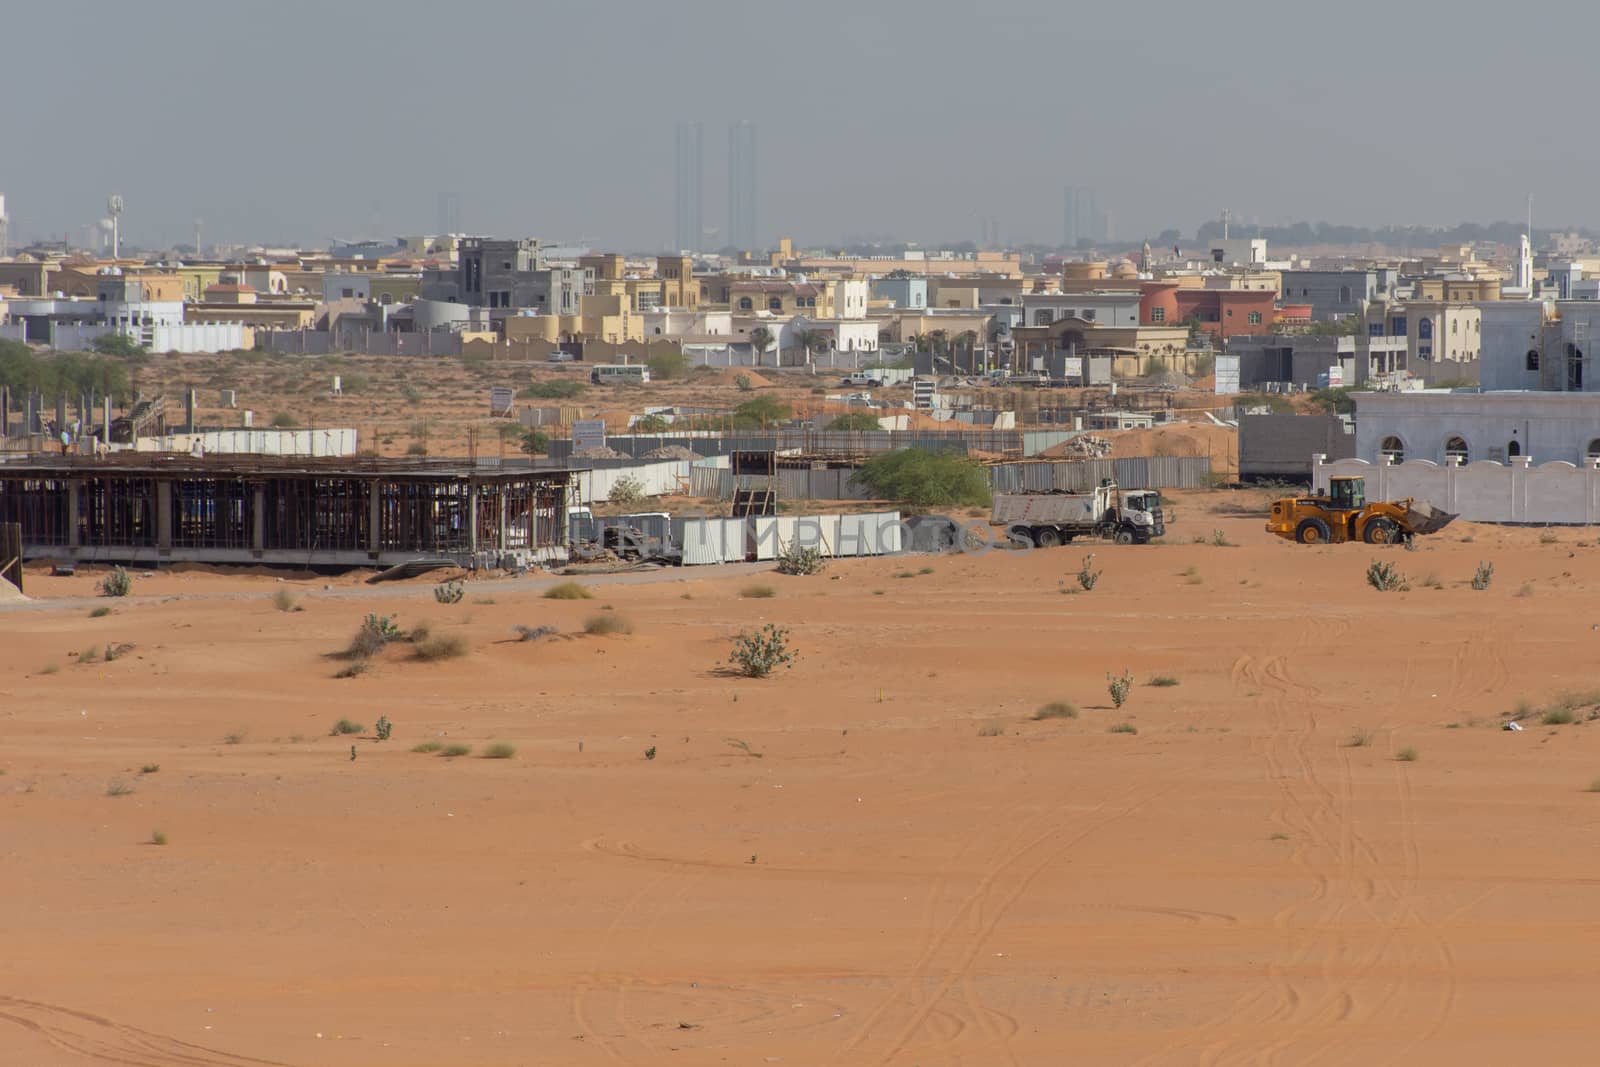 Residential Housing Development in the United Arab Emirates with trucks and machines.